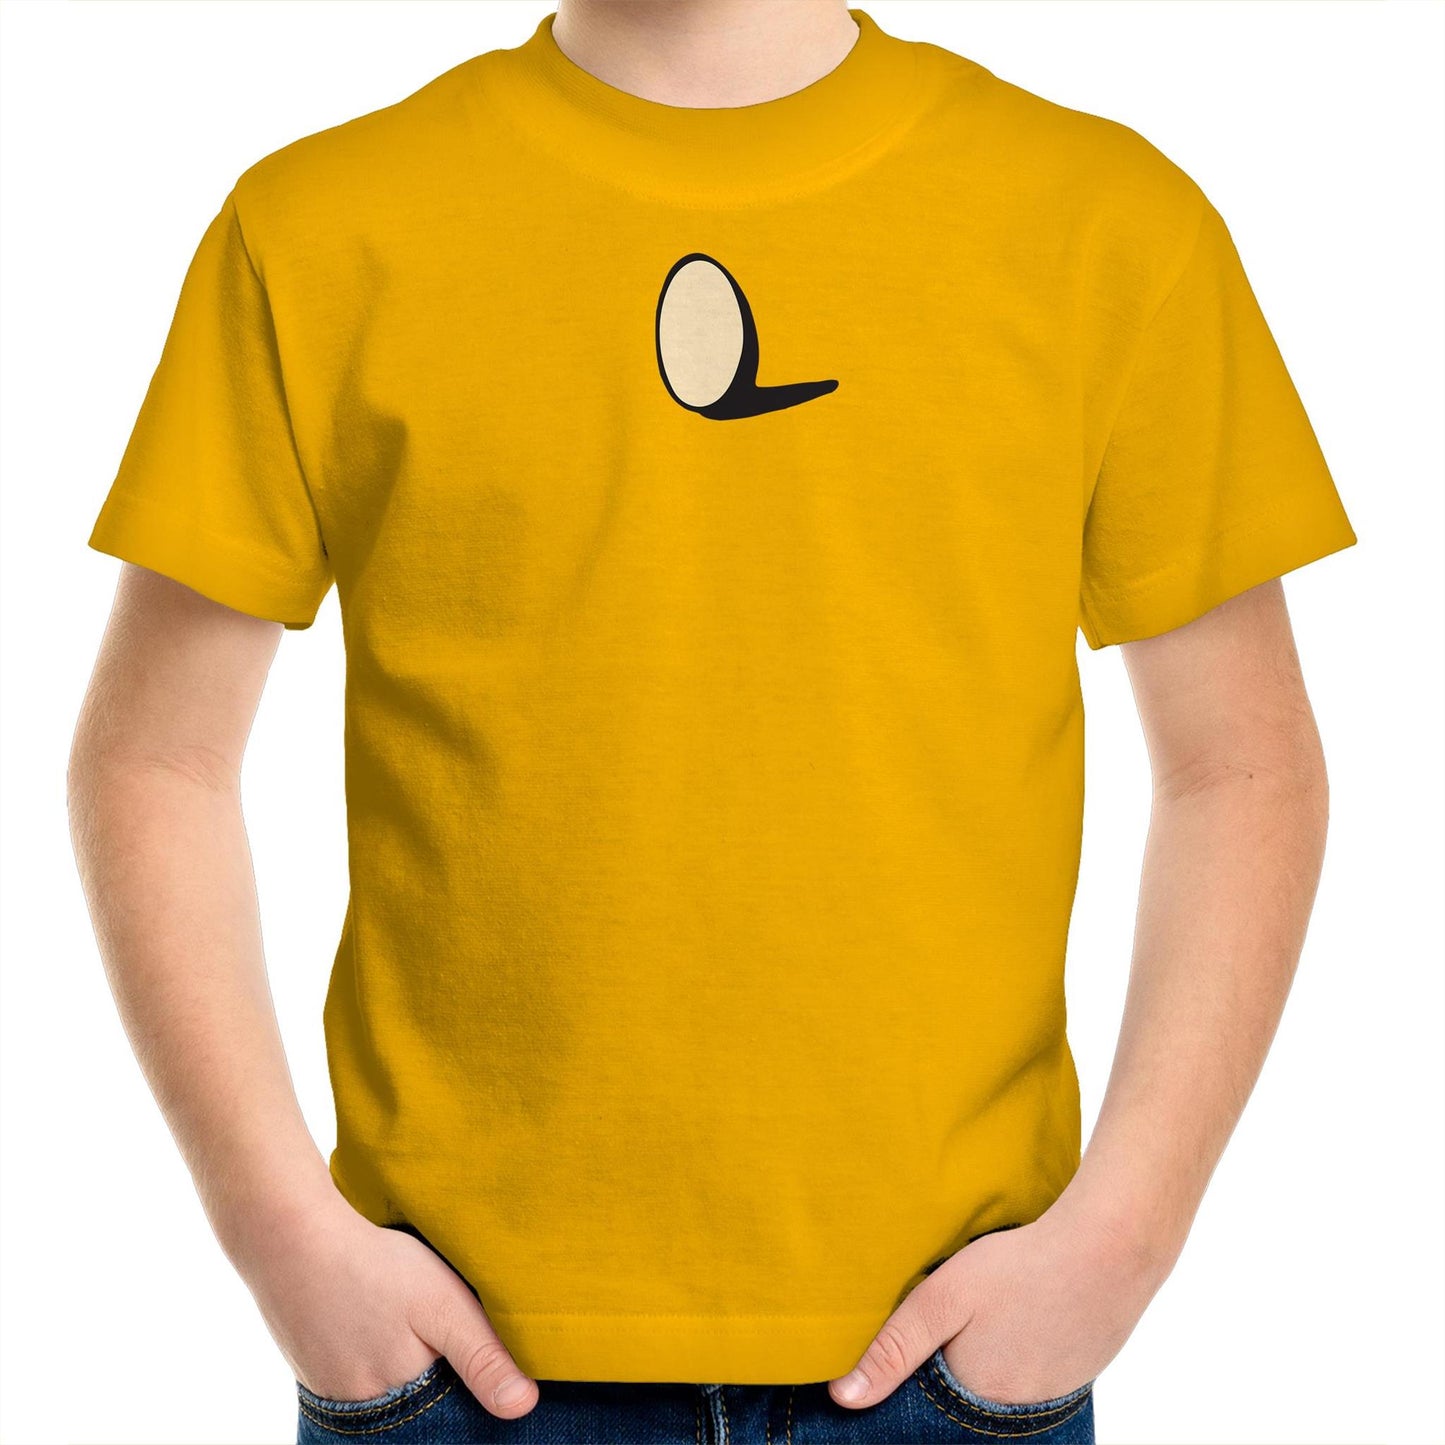 Egg T Shirts for Kids